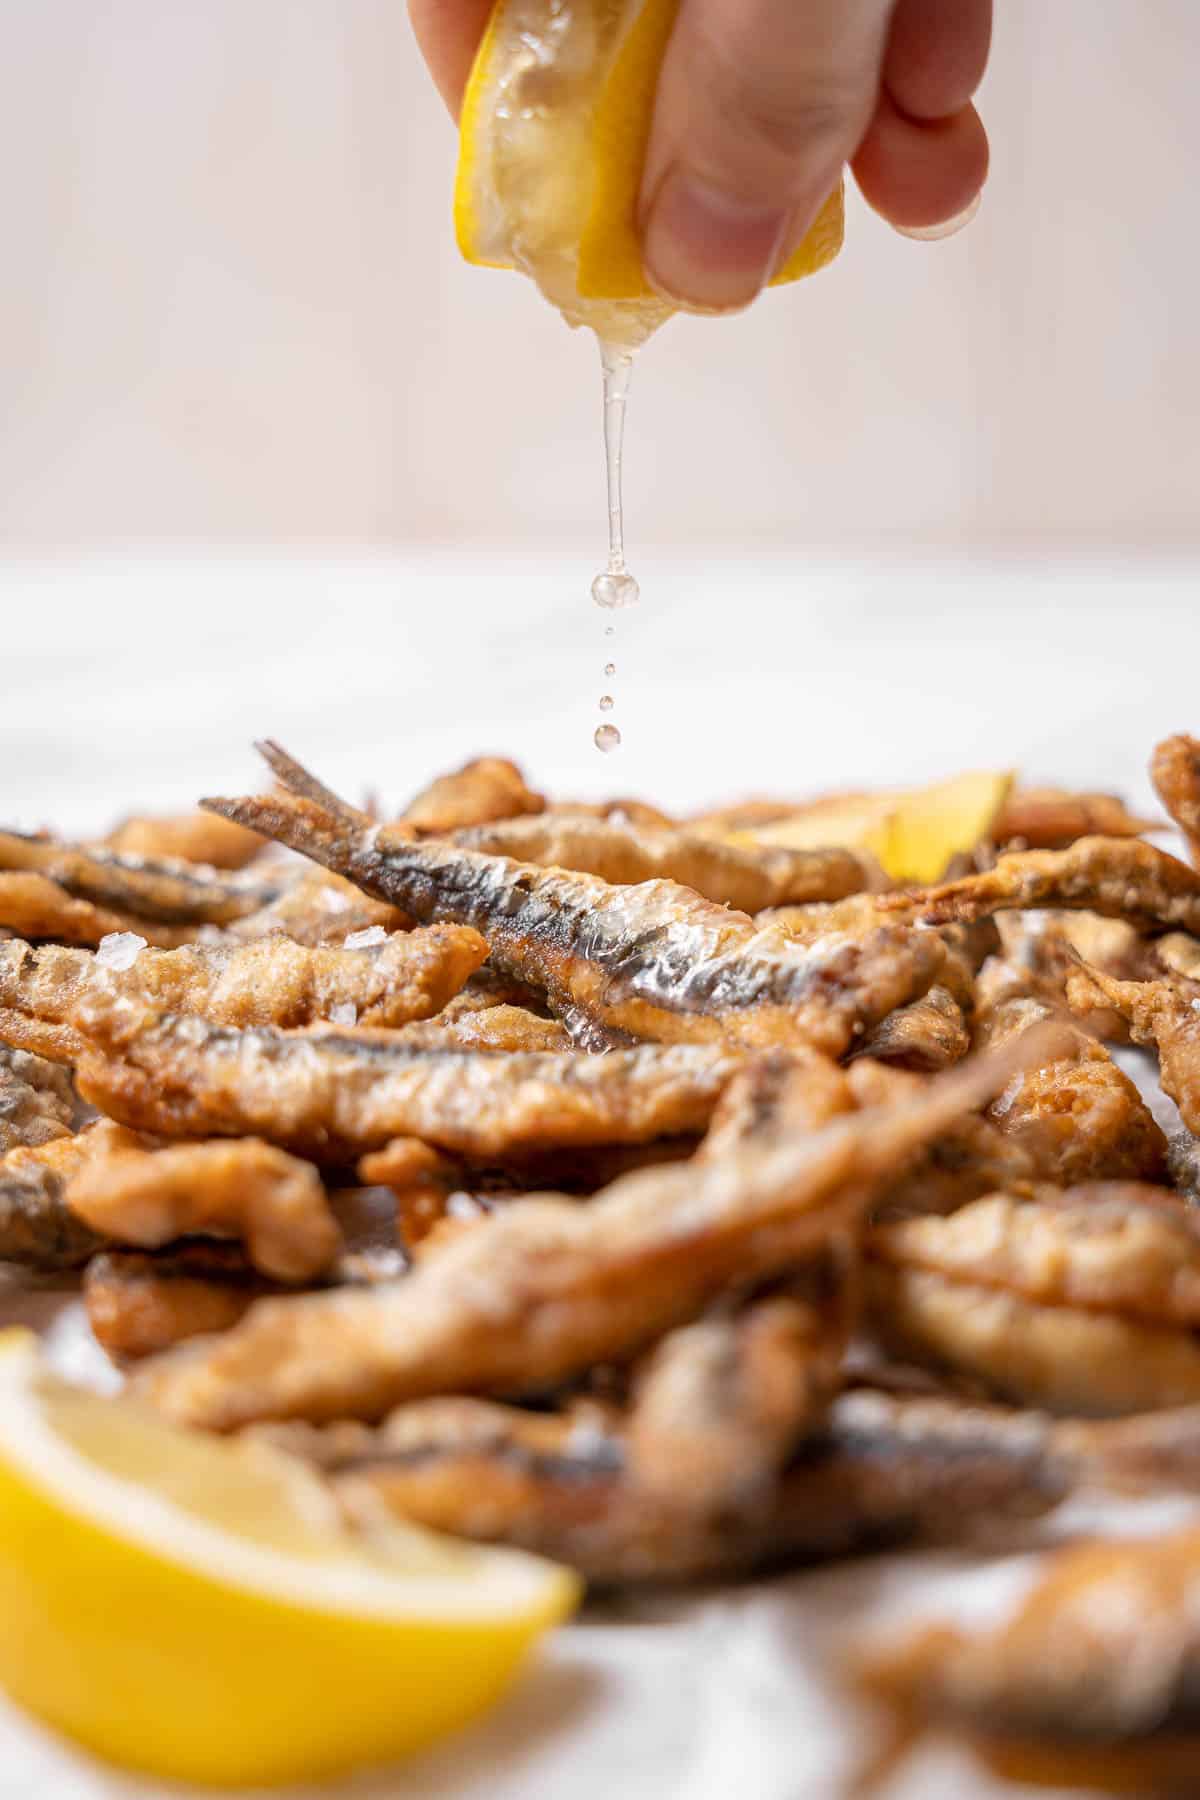 squeezing lemon juice on fried anchovies.